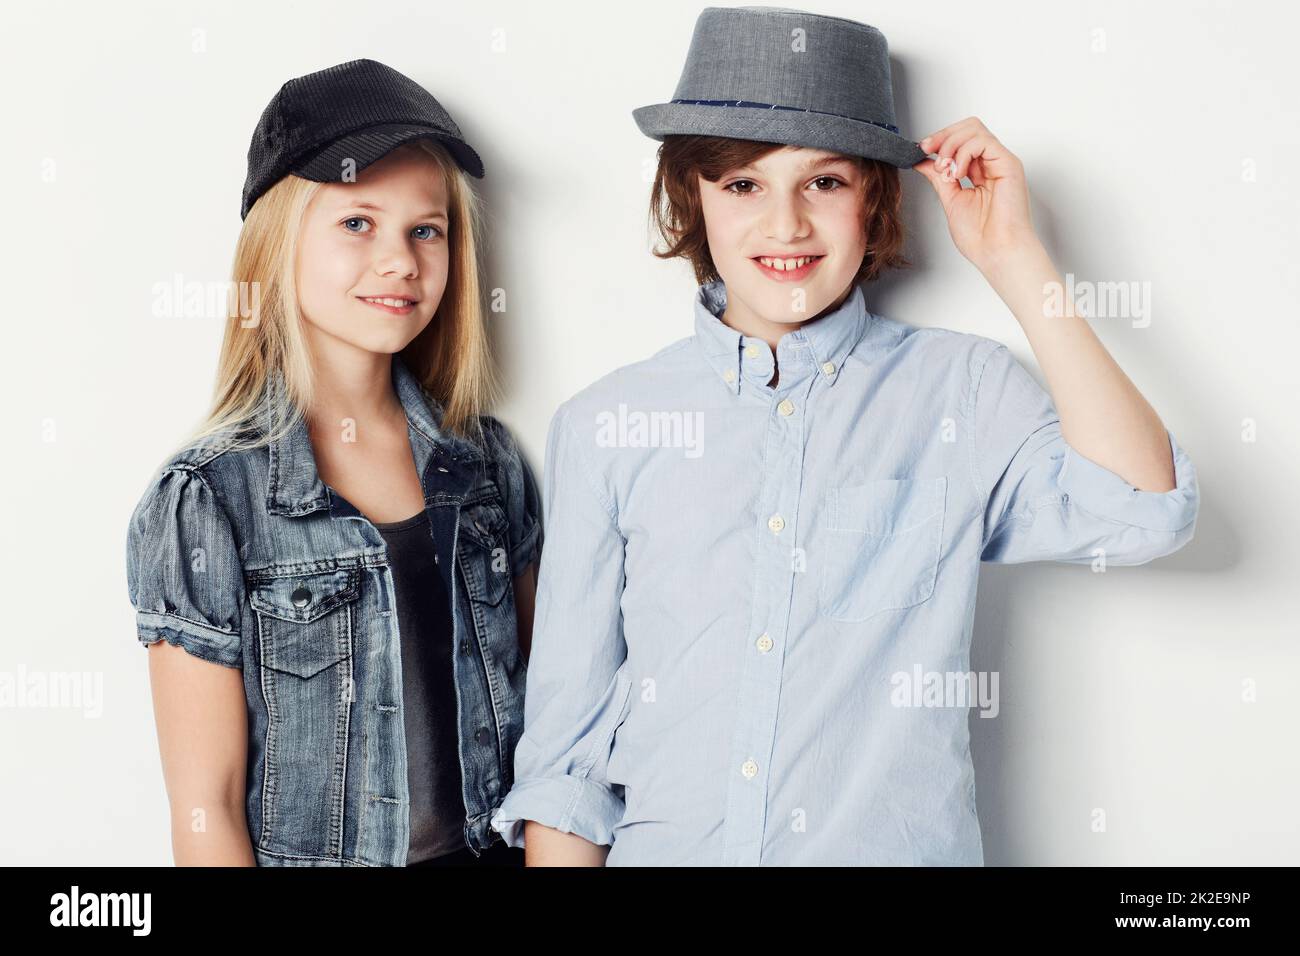 Hes going to be the perfect gentlemen. Portrait of two fashionable young kids posing in the studio. Stock Photo